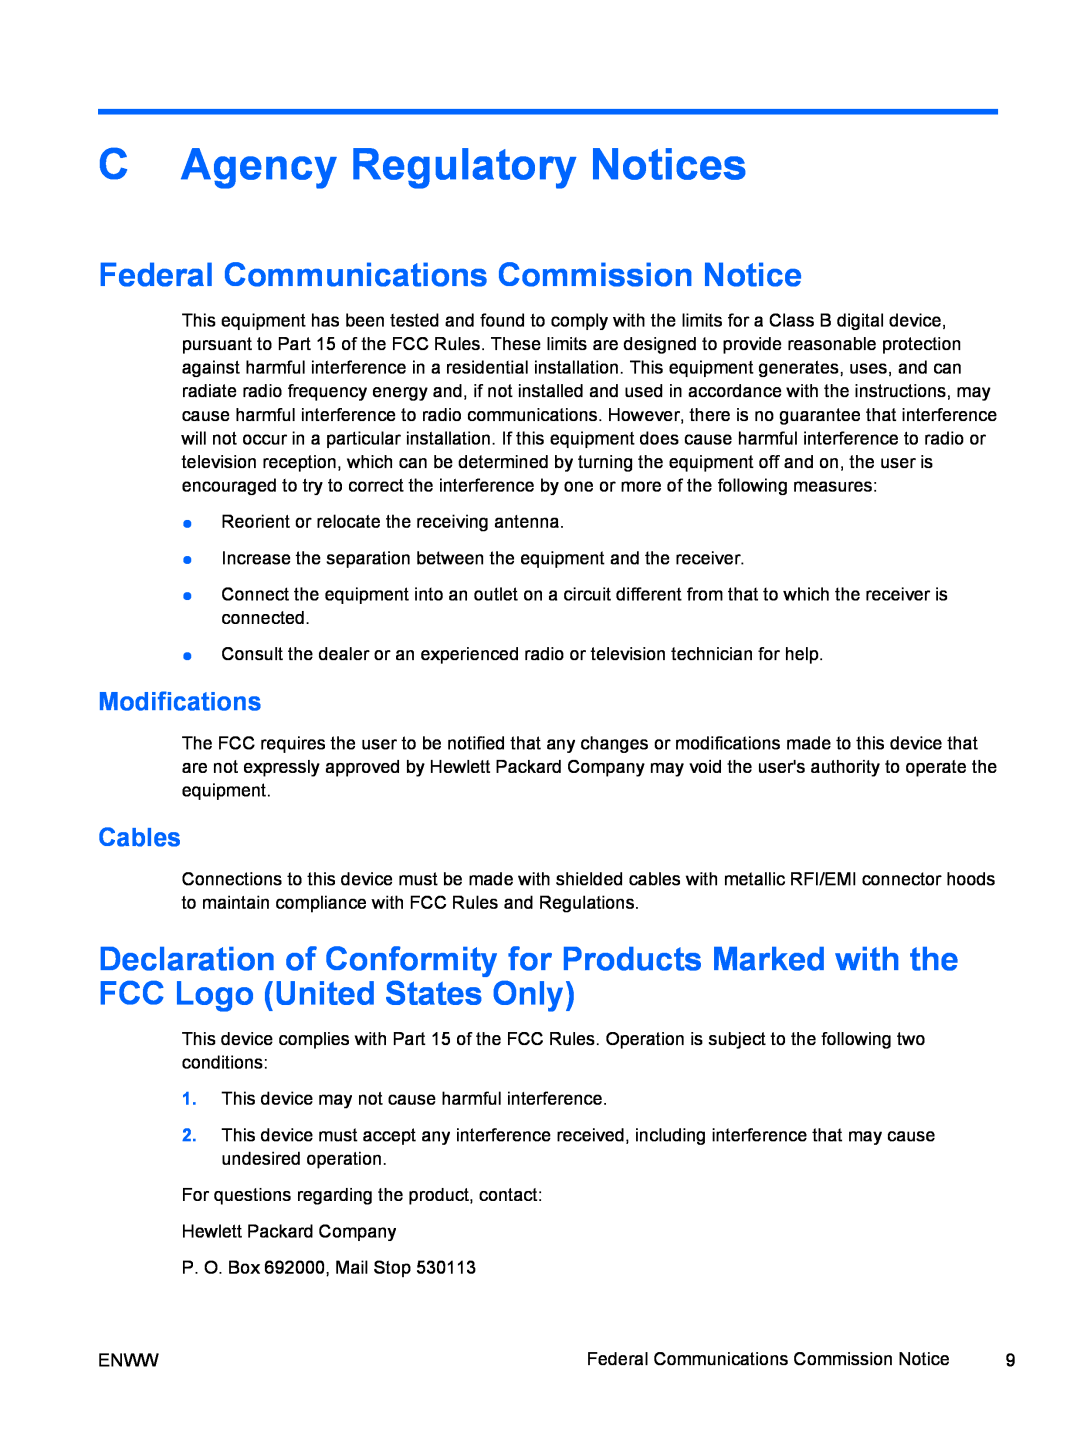 HP 8000 tower manual C Agency Regulatory Notices, Federal Communications Commission Notice, Modifications, Cables 